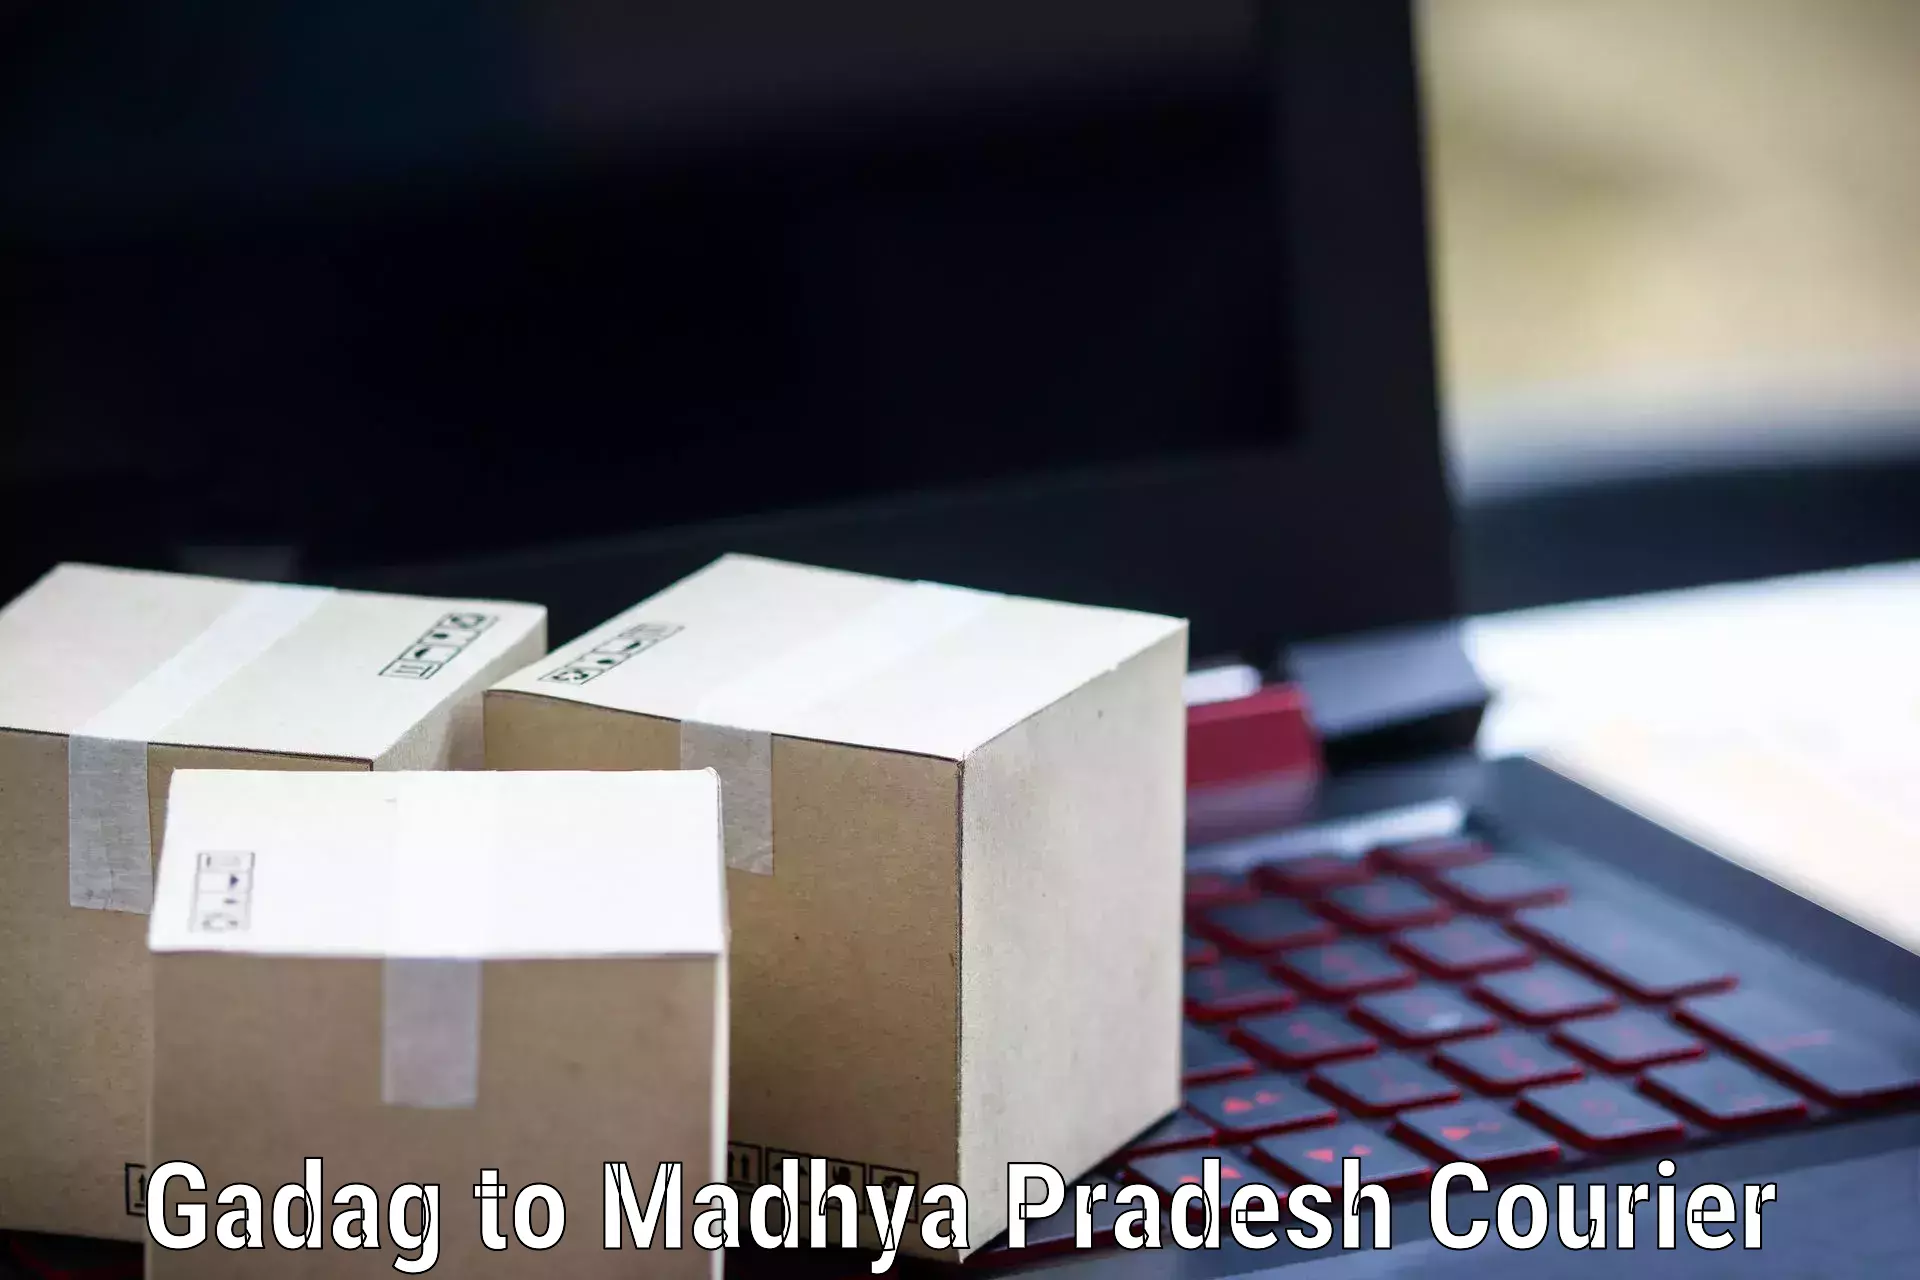 Courier service efficiency Gadag to Sidhi